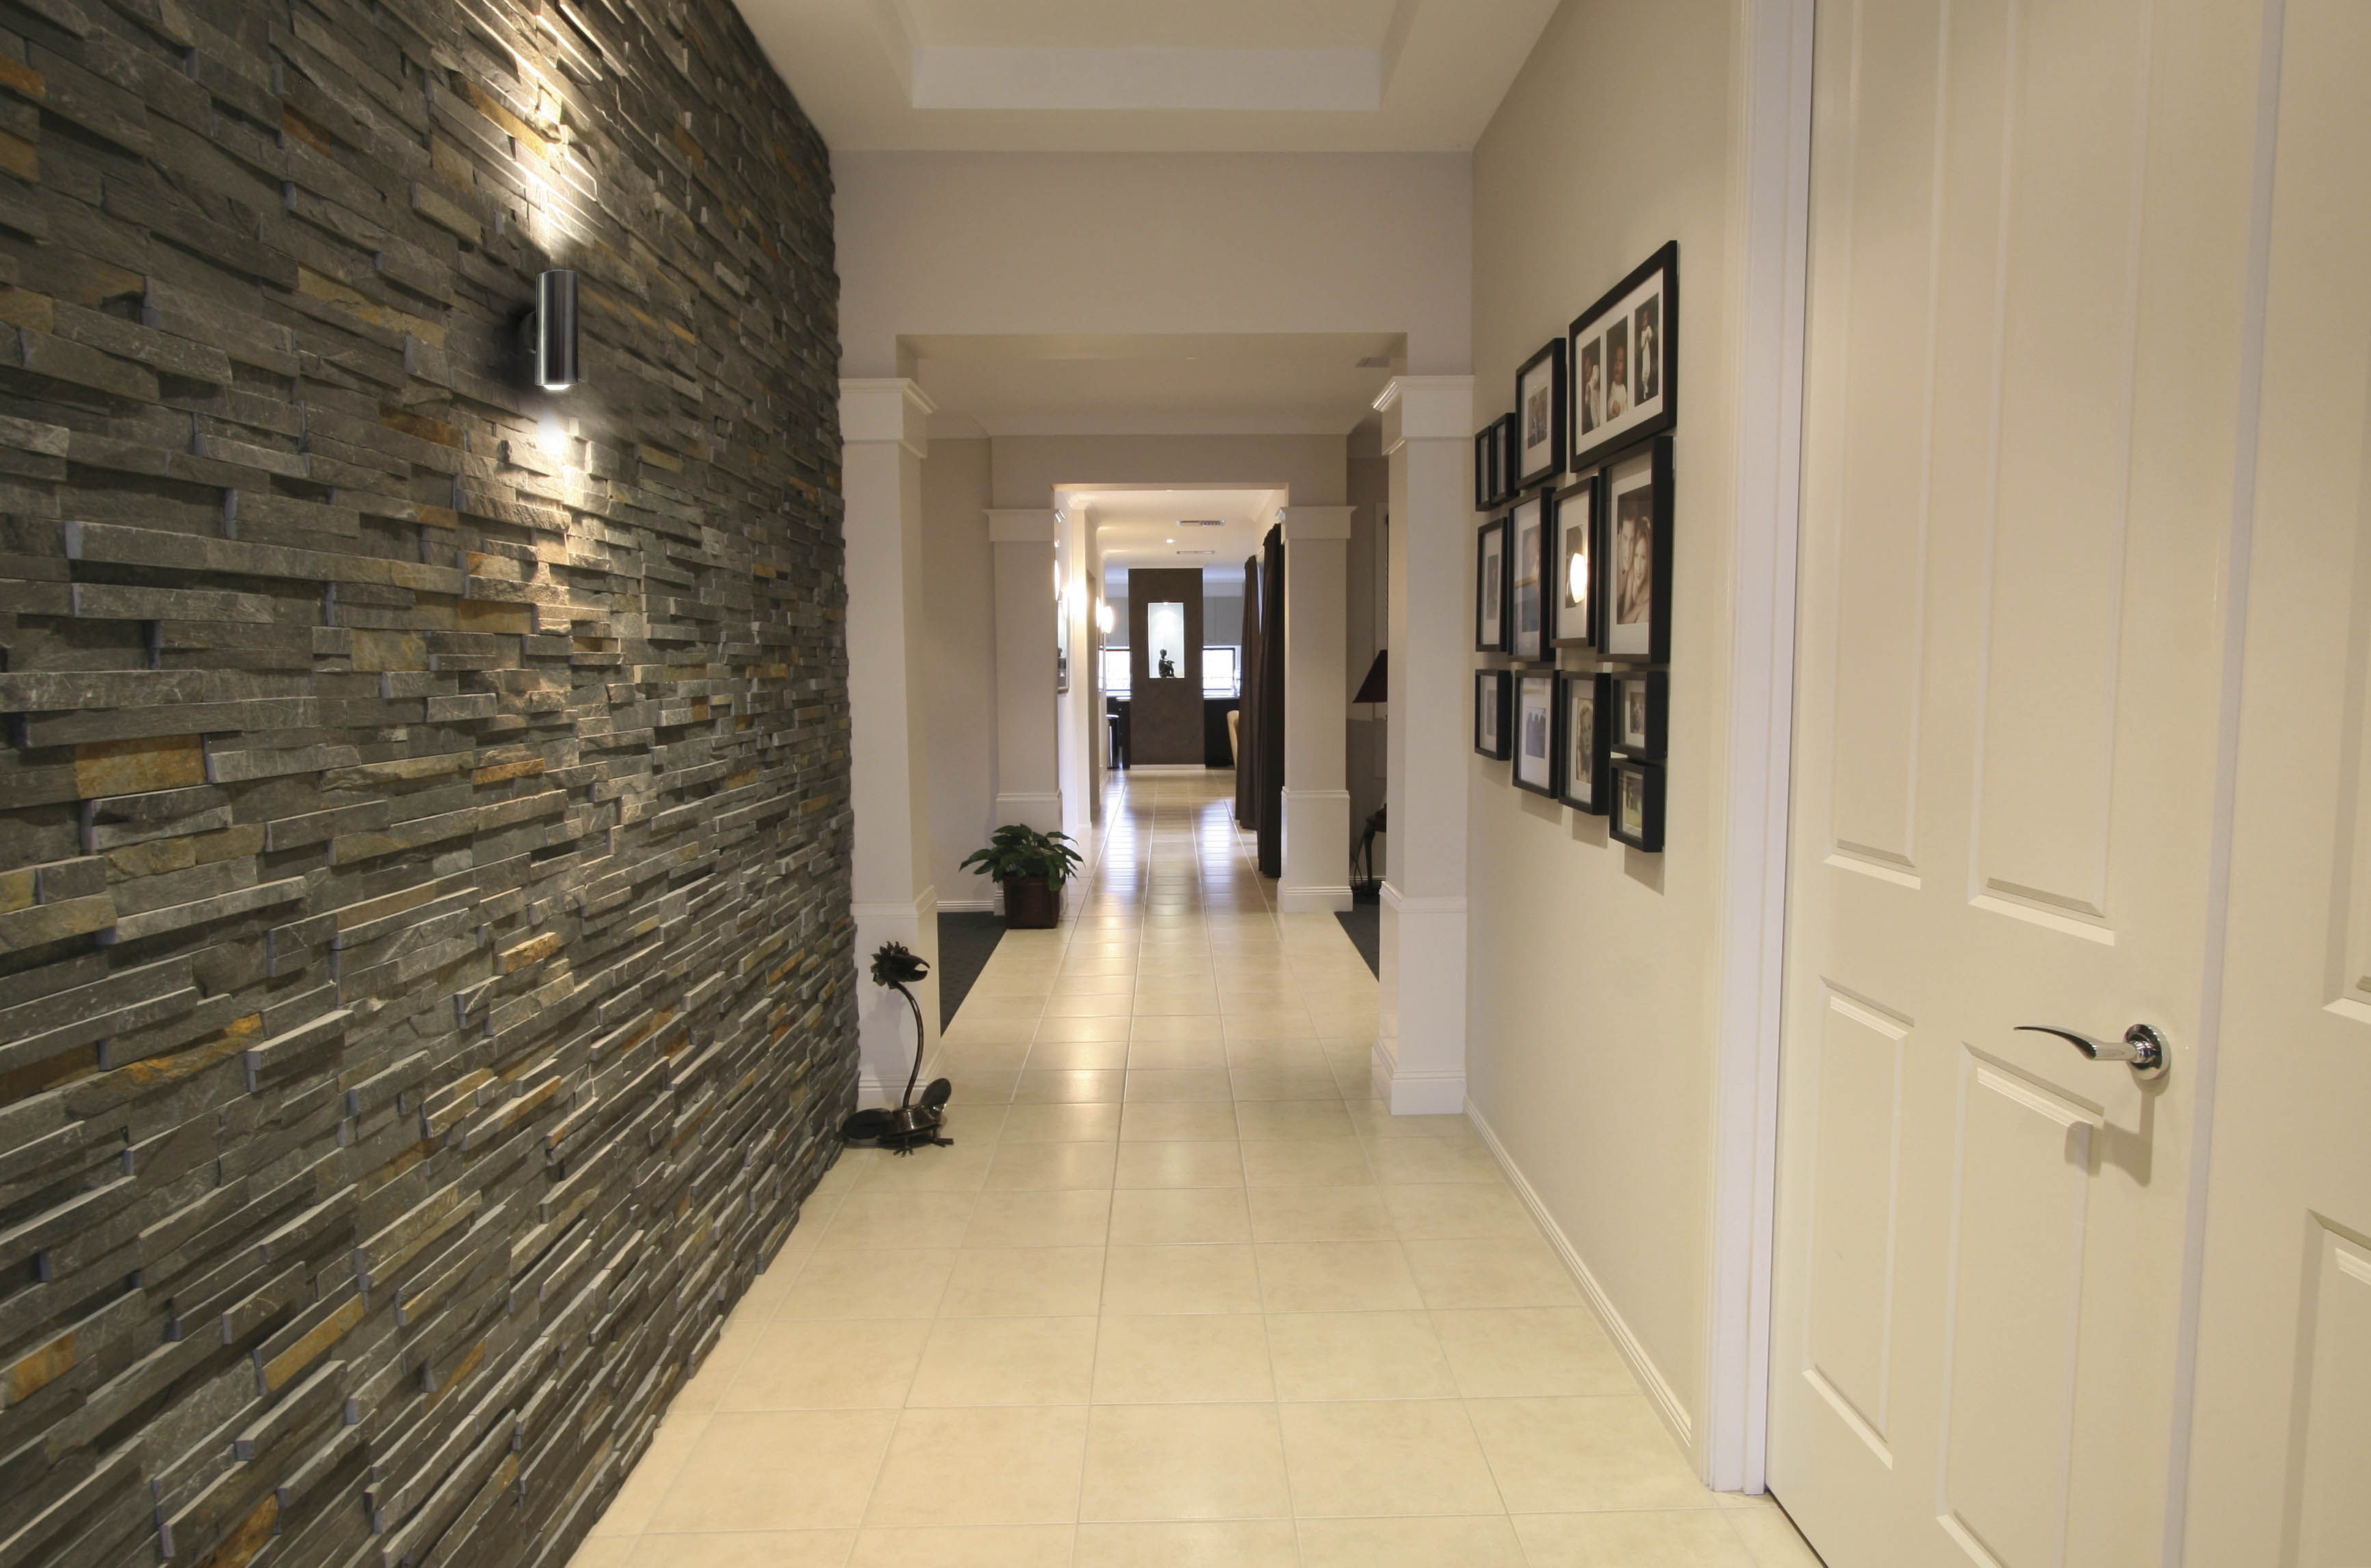 Looking down the hallway of a modern home with whote tiles for flooring and stoneword wall on left.